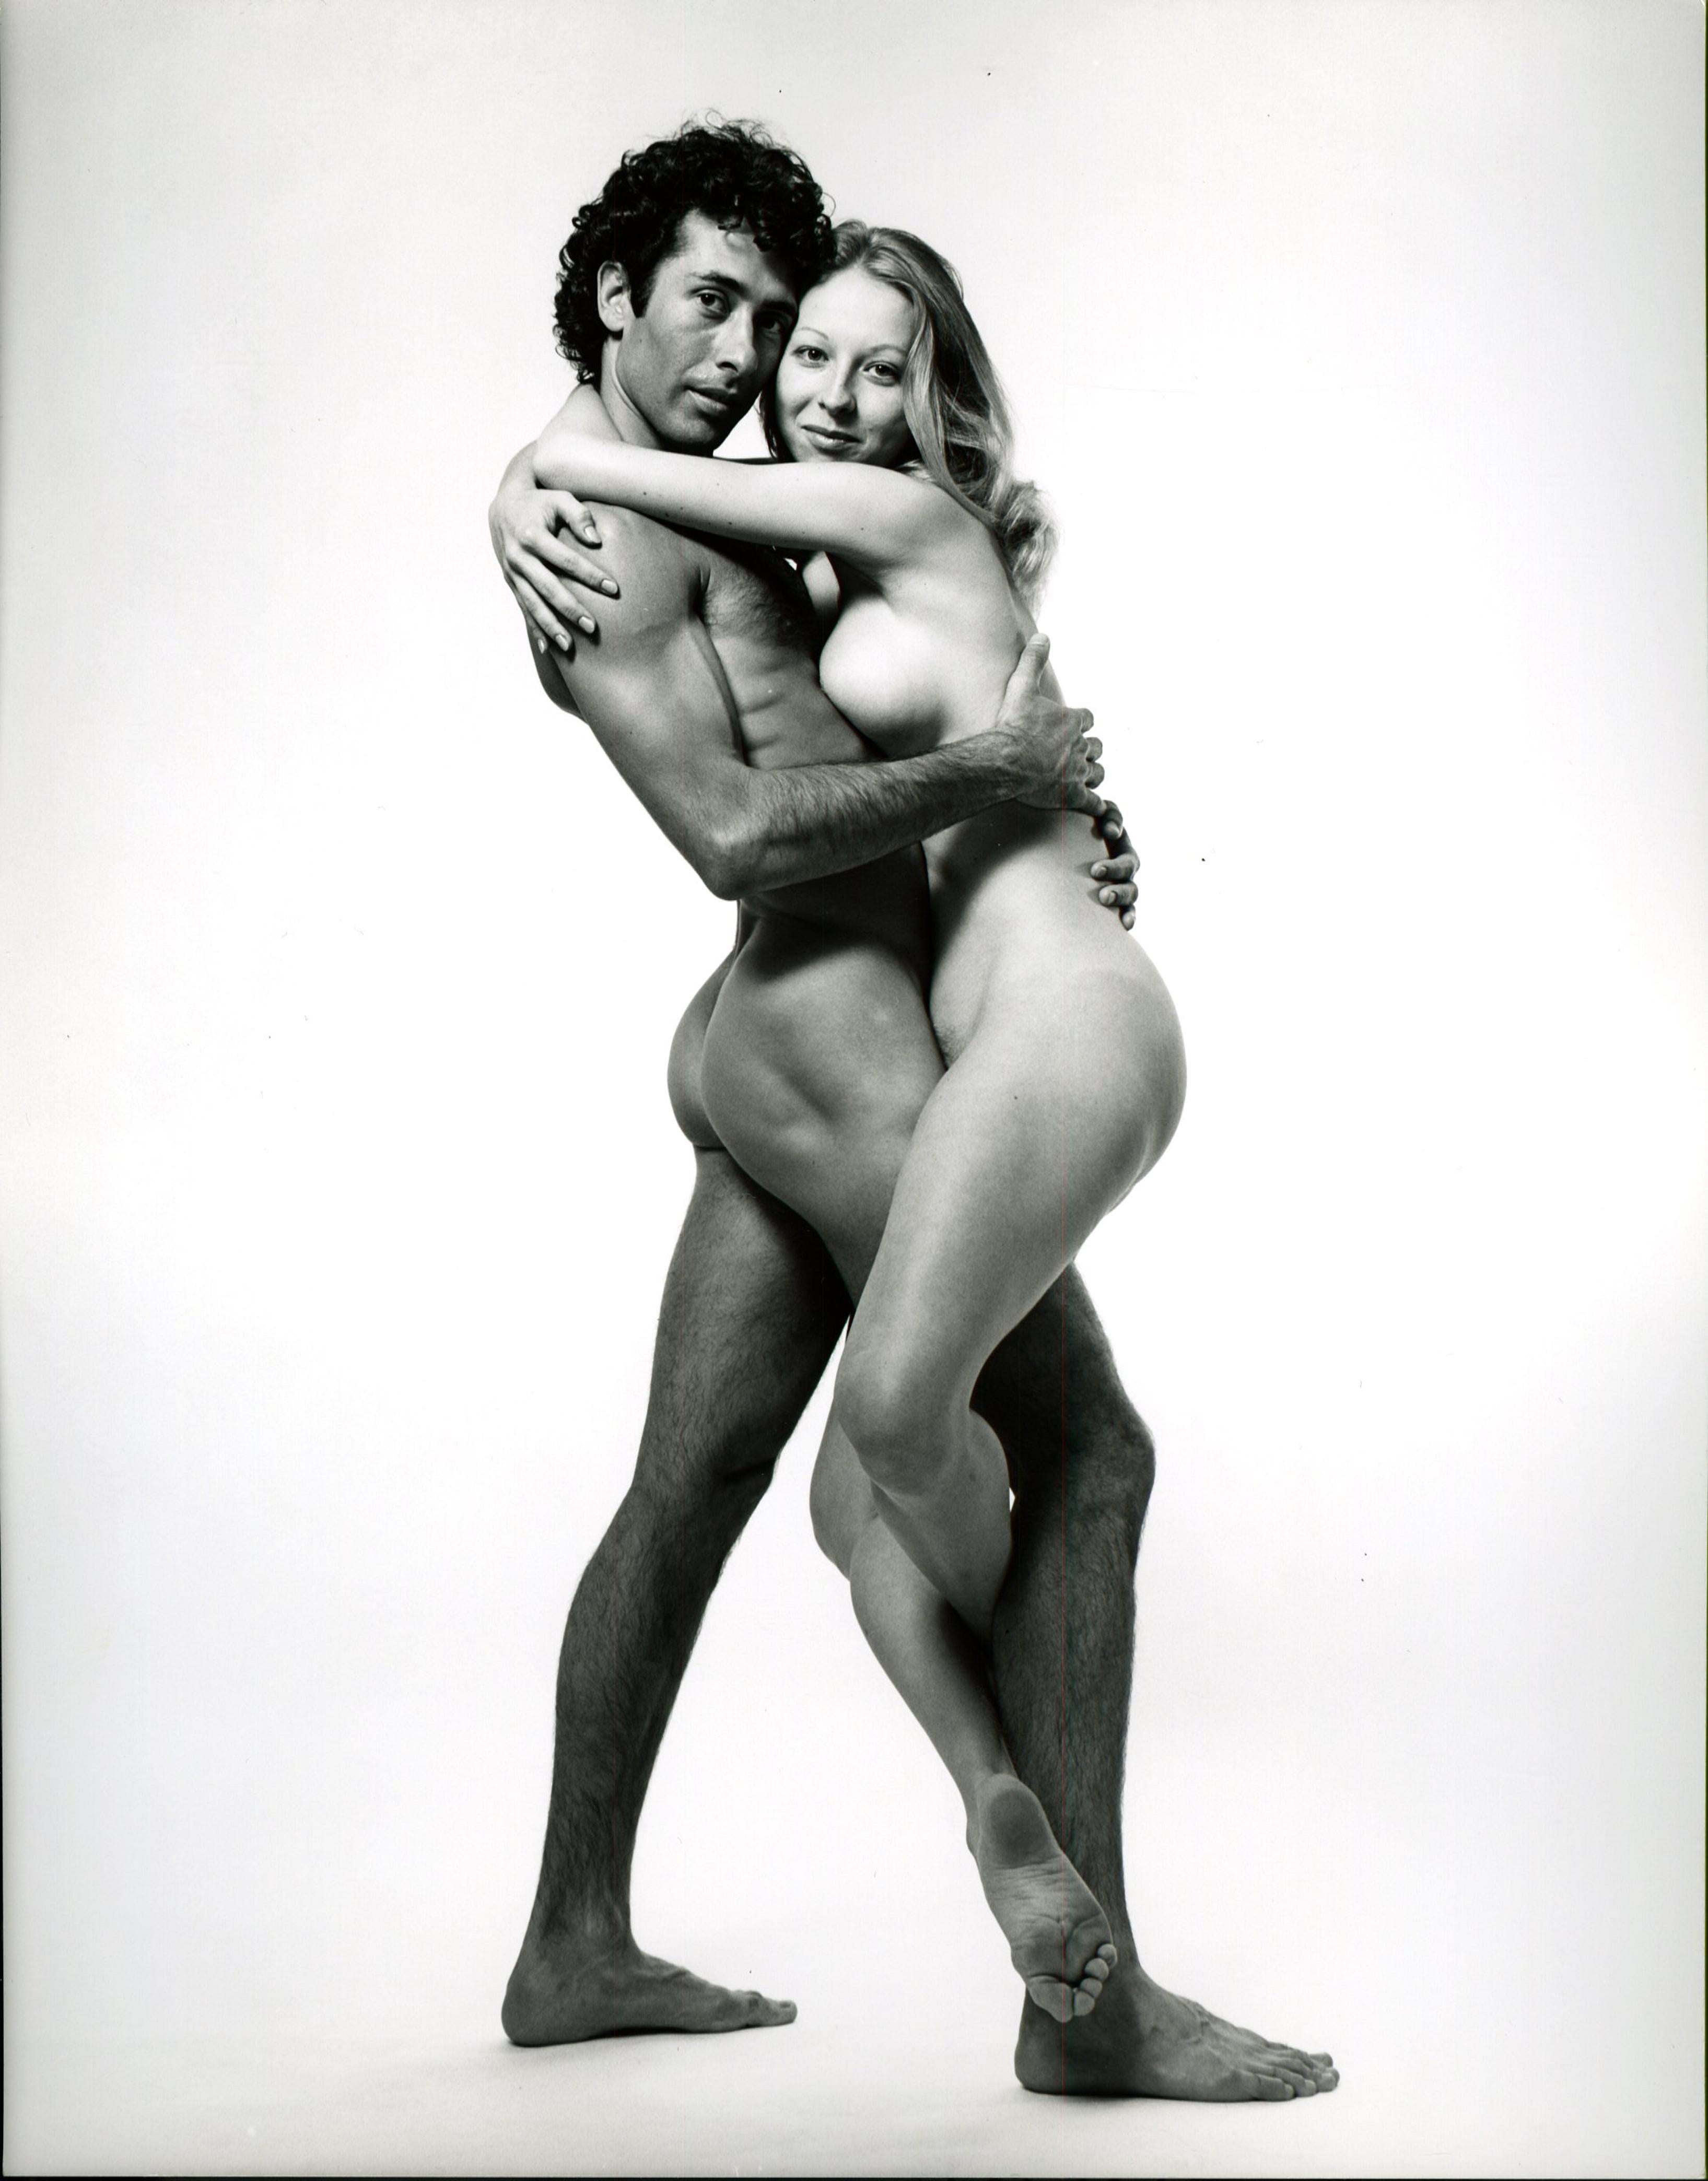 Jack Mitchell Nude Photograph - Marcus and Debbie Williamson photographed nude for 'After Dark' magazine